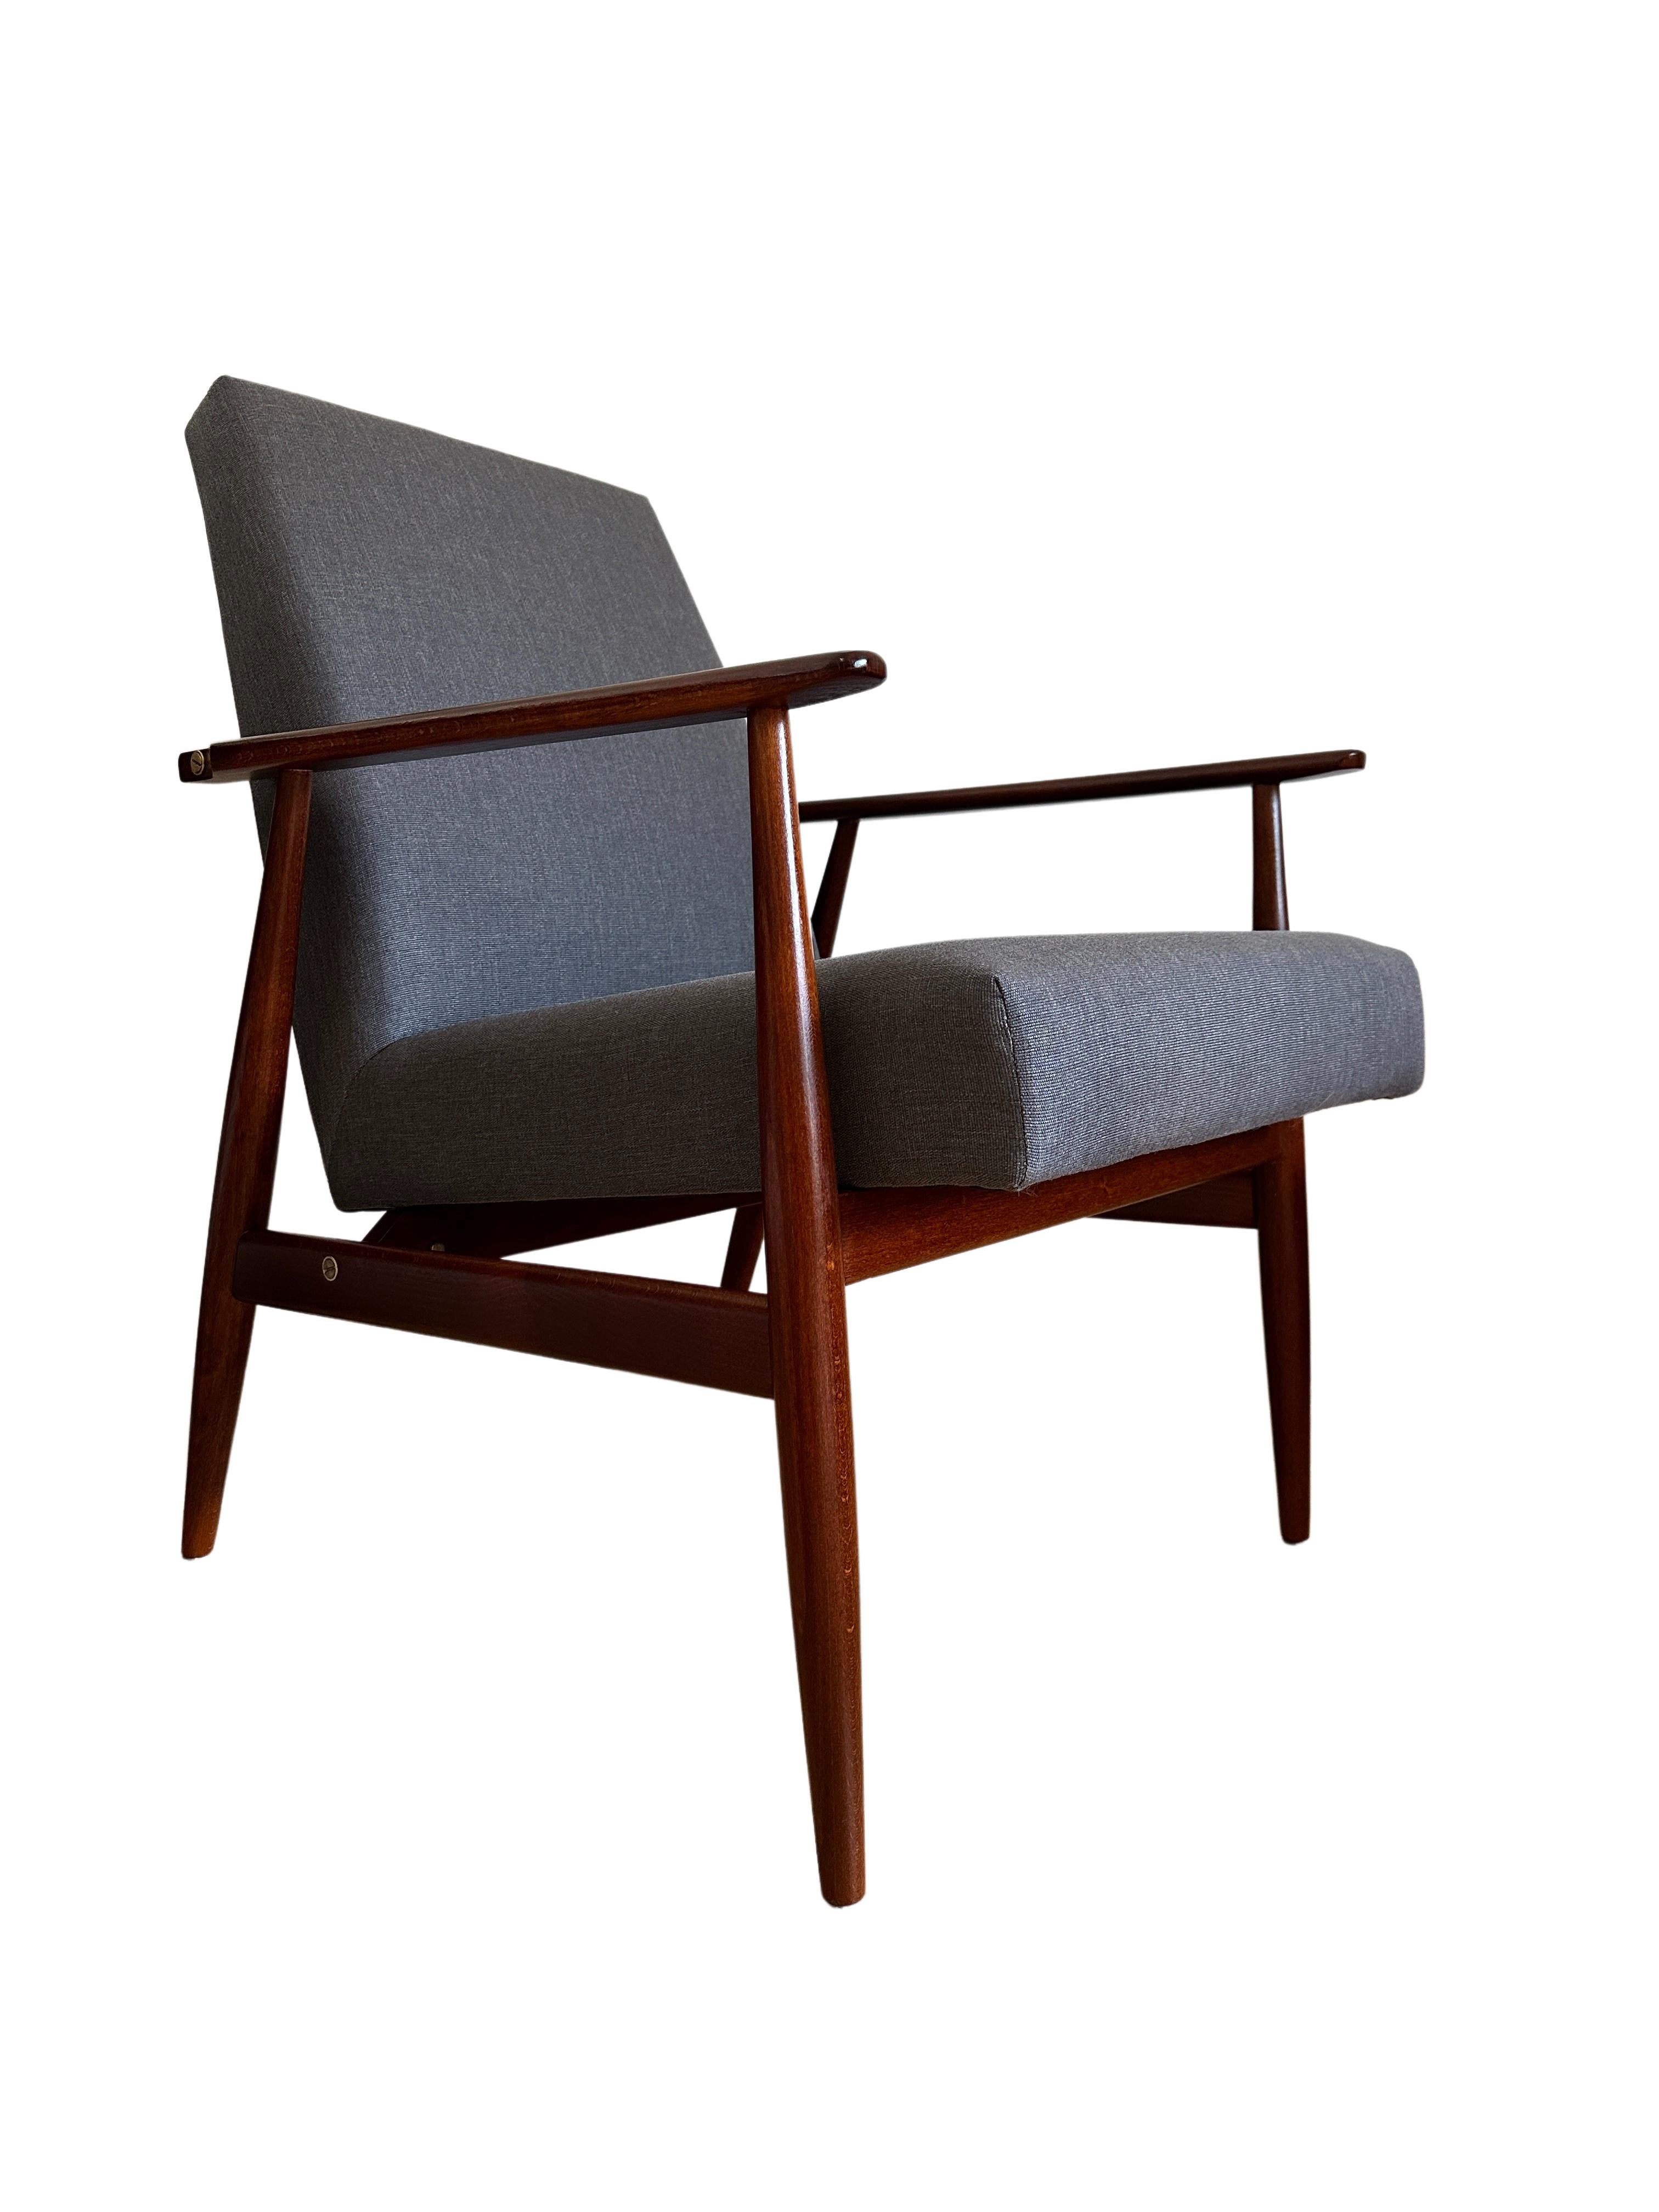 Midcentury Armchair in Kvadrat Upholstery by Henryk Lis, Europe, 1960s For Sale 4